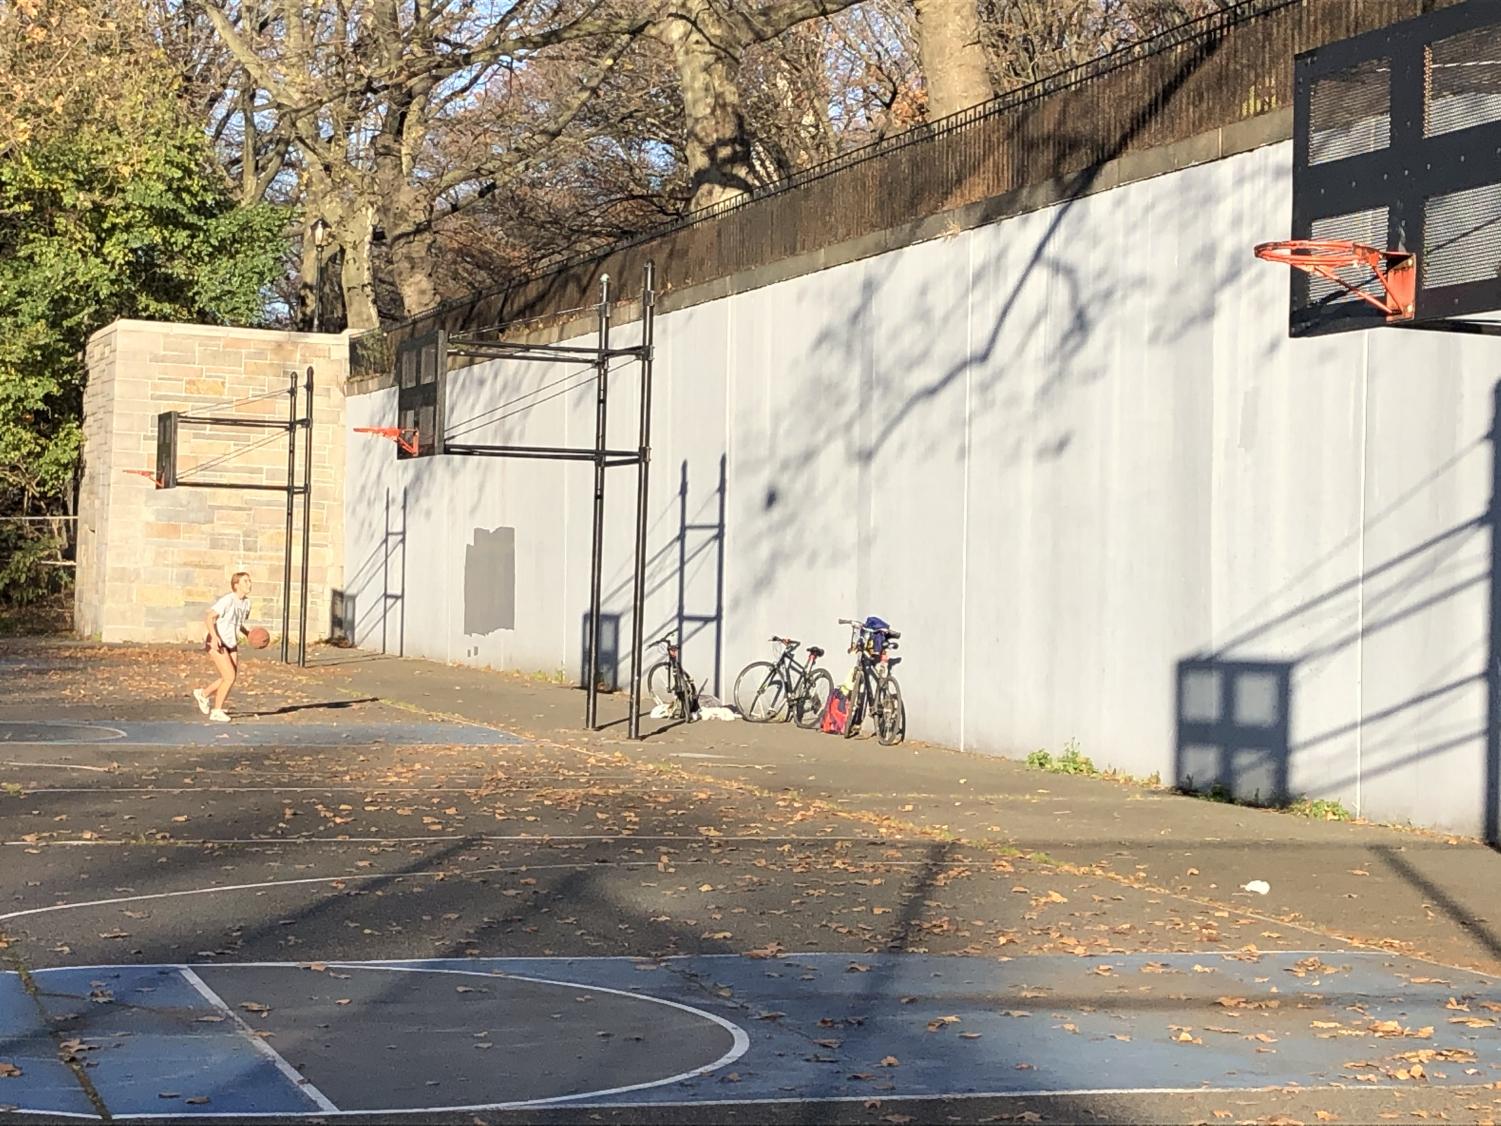 Why Are There So Many Basketball Hoops Without Nets in New York City Parks?  – The Science Survey